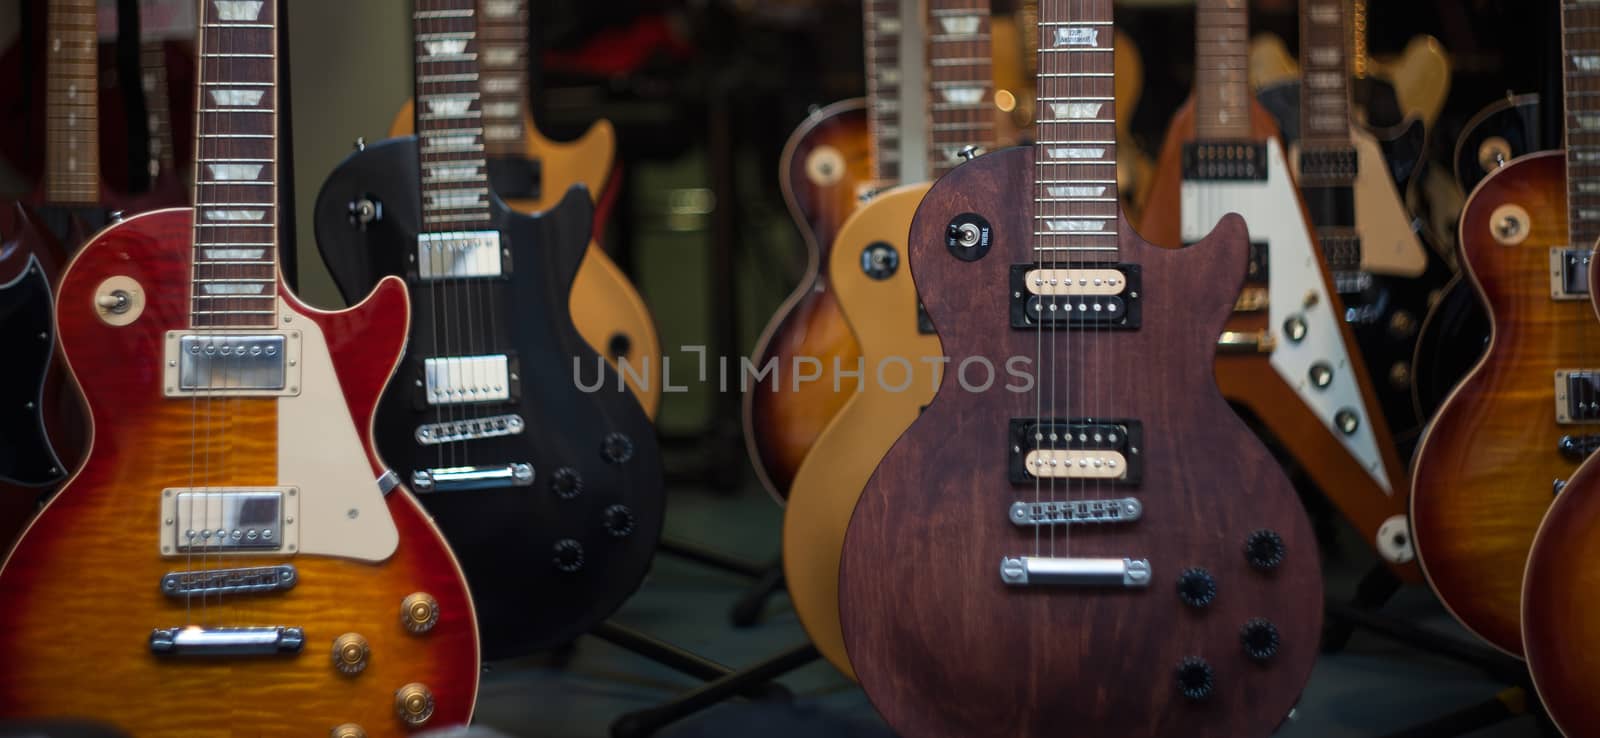 View of many guitars in the shop